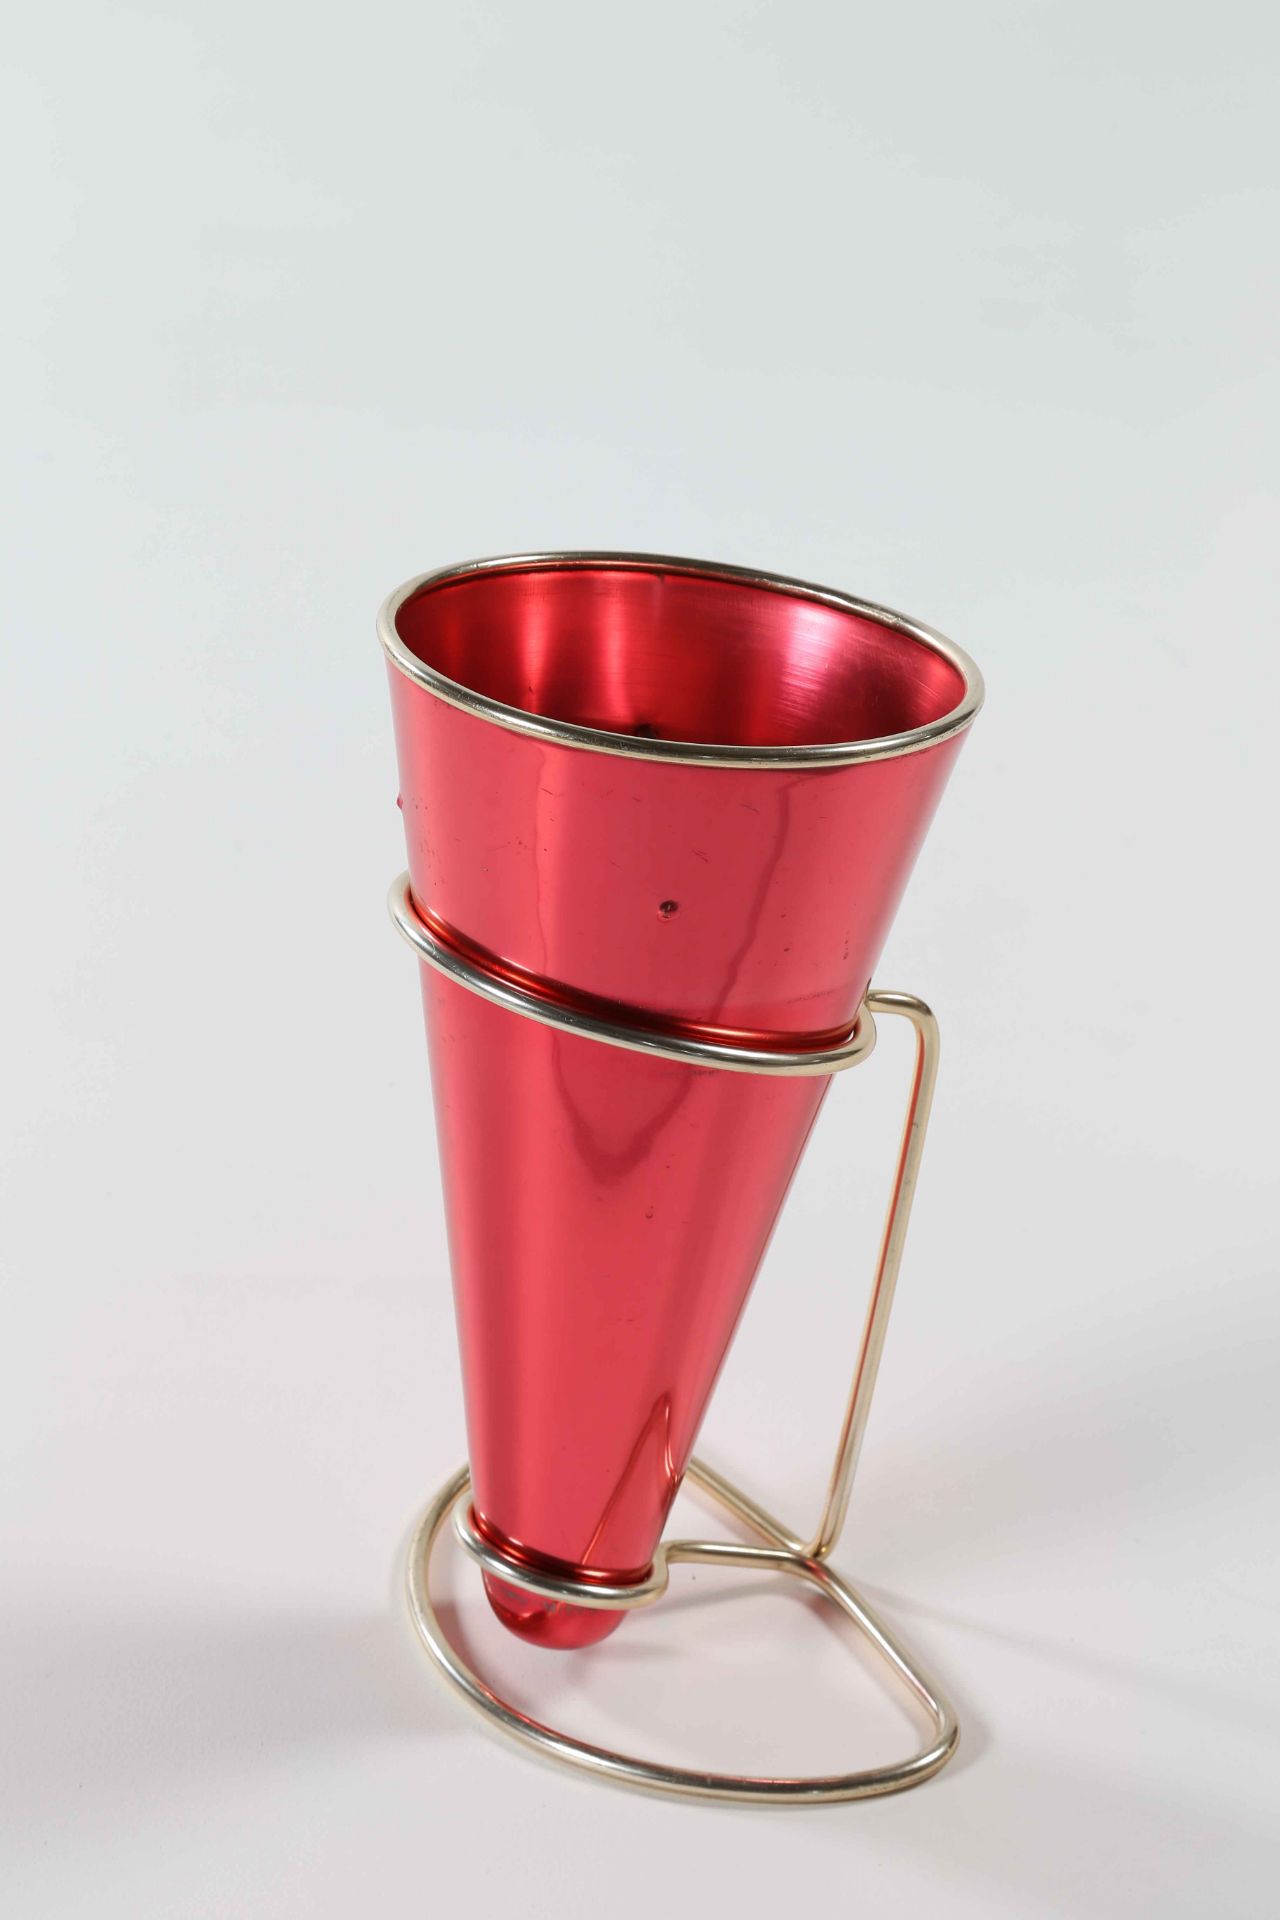 SOTTSASS ETTORE (1917 - 2007)
Anodised aluminium umbrella stand.
Produced by Rinnovel for Raymour